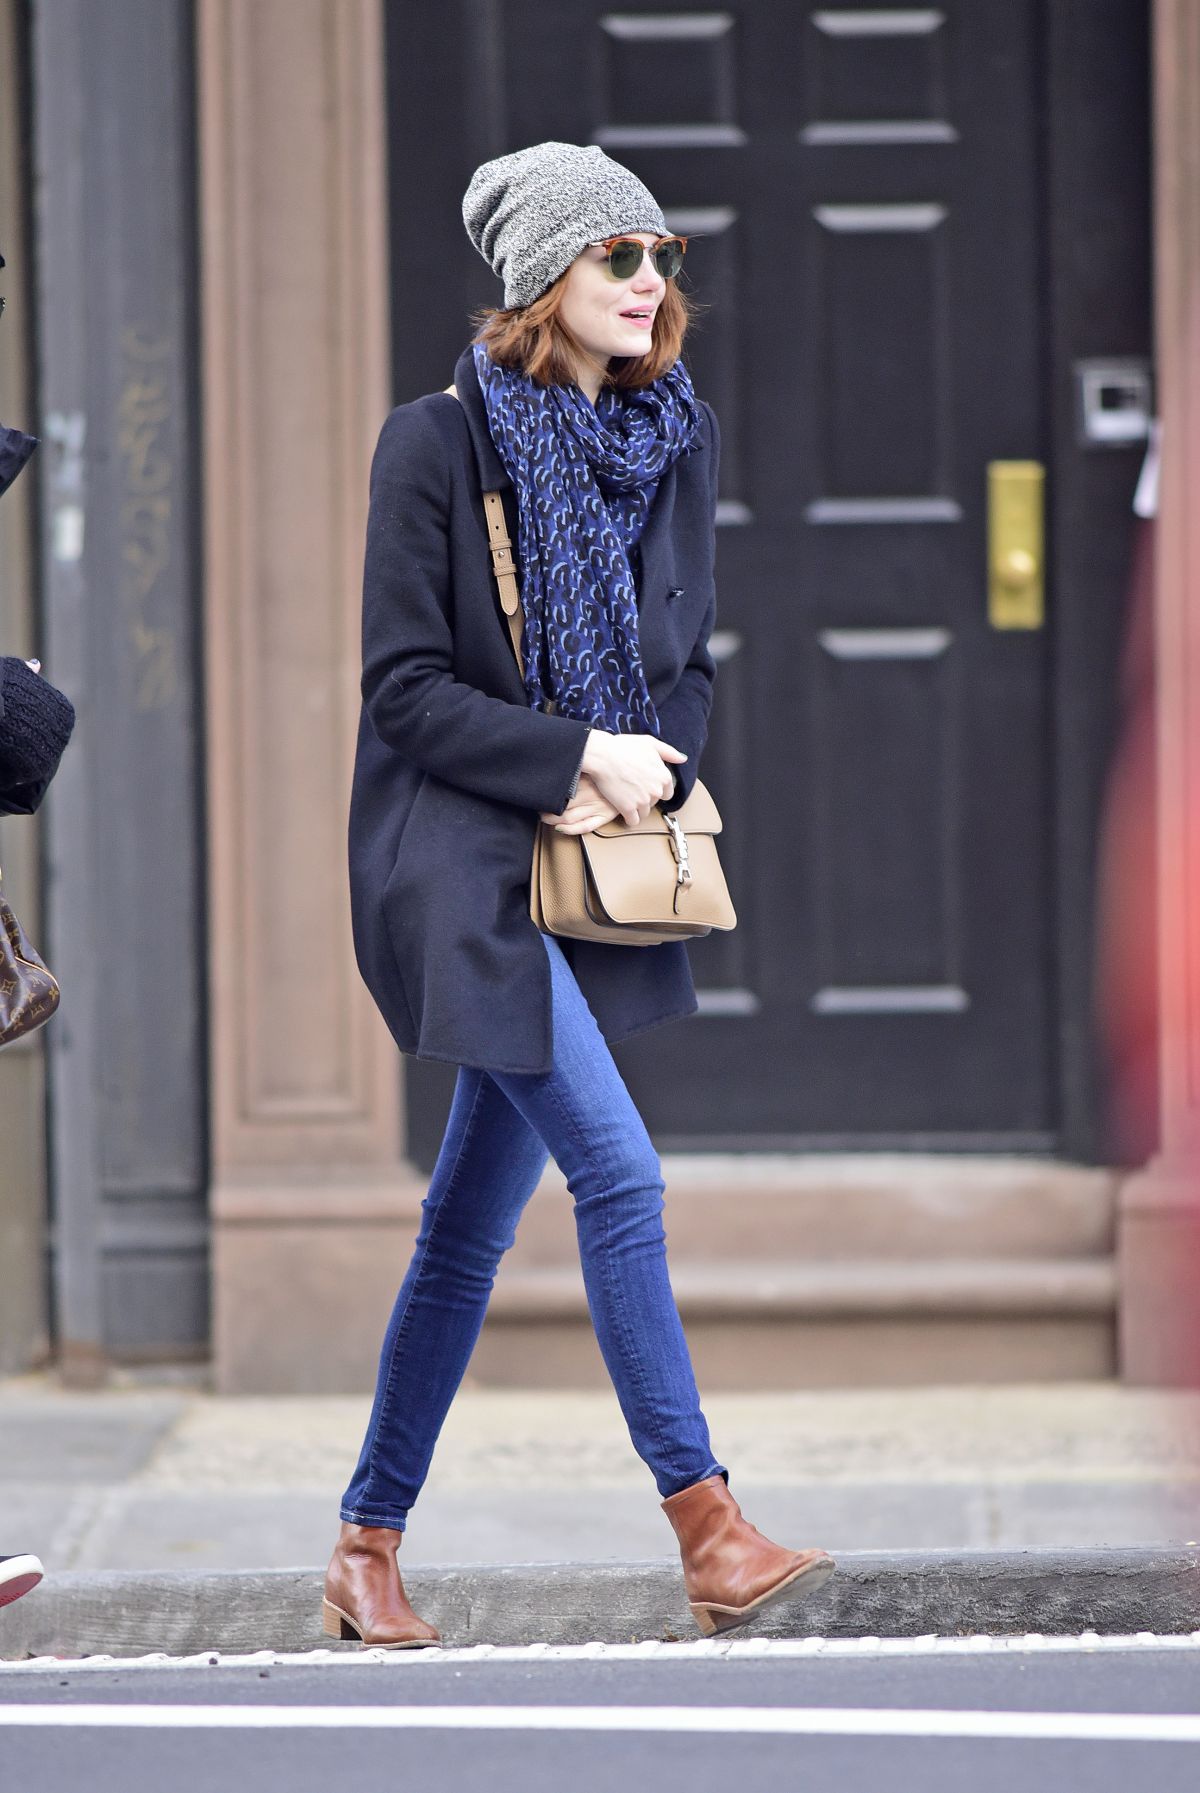 USA Fashion | Music News: EMMA STONE in Jeans Out and About in New York